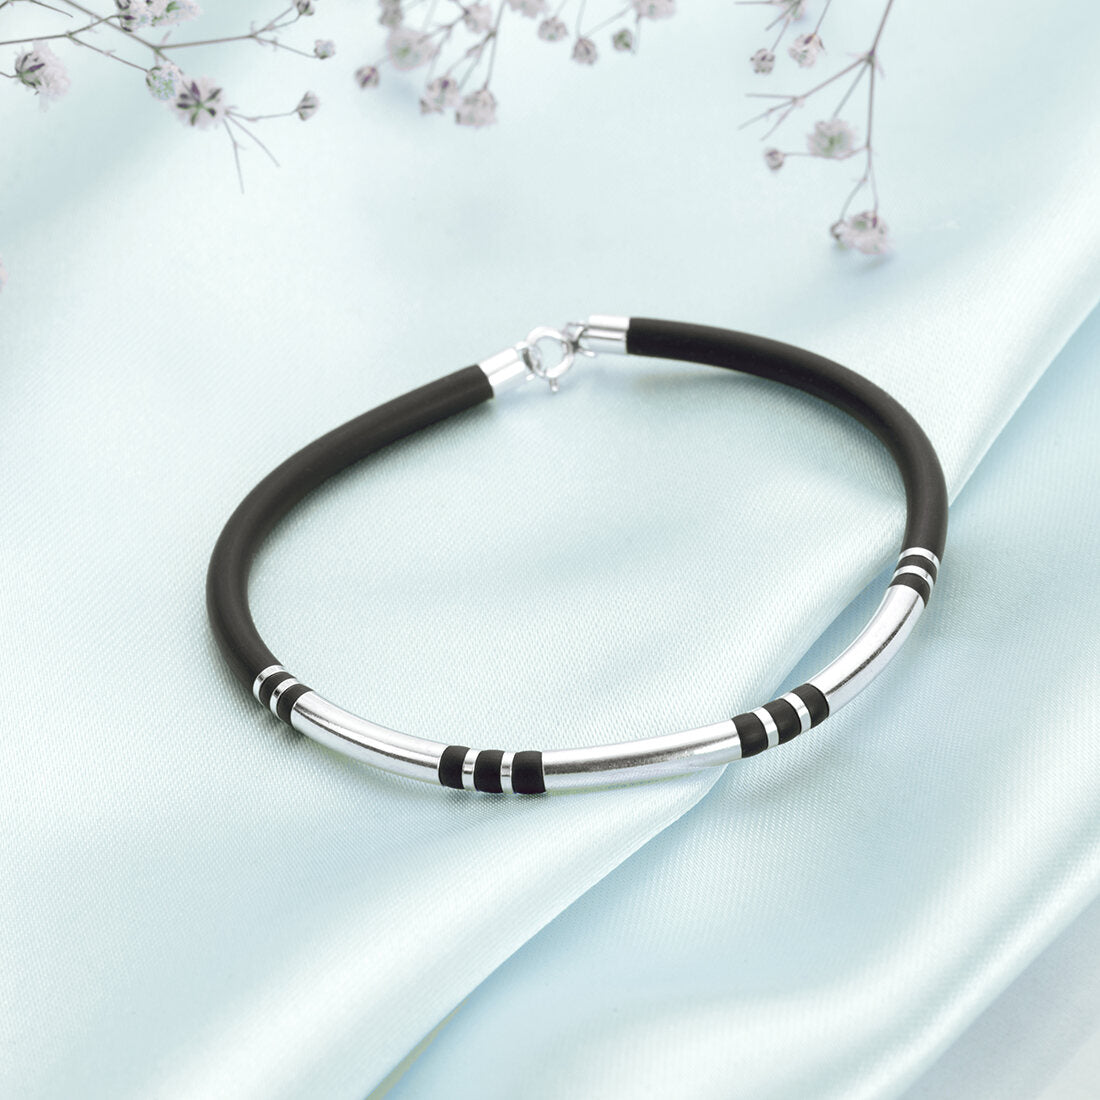 Refined Harmony Rhodium-Plated 925 Sterling Silver With Leather Strap Bracelet for Him